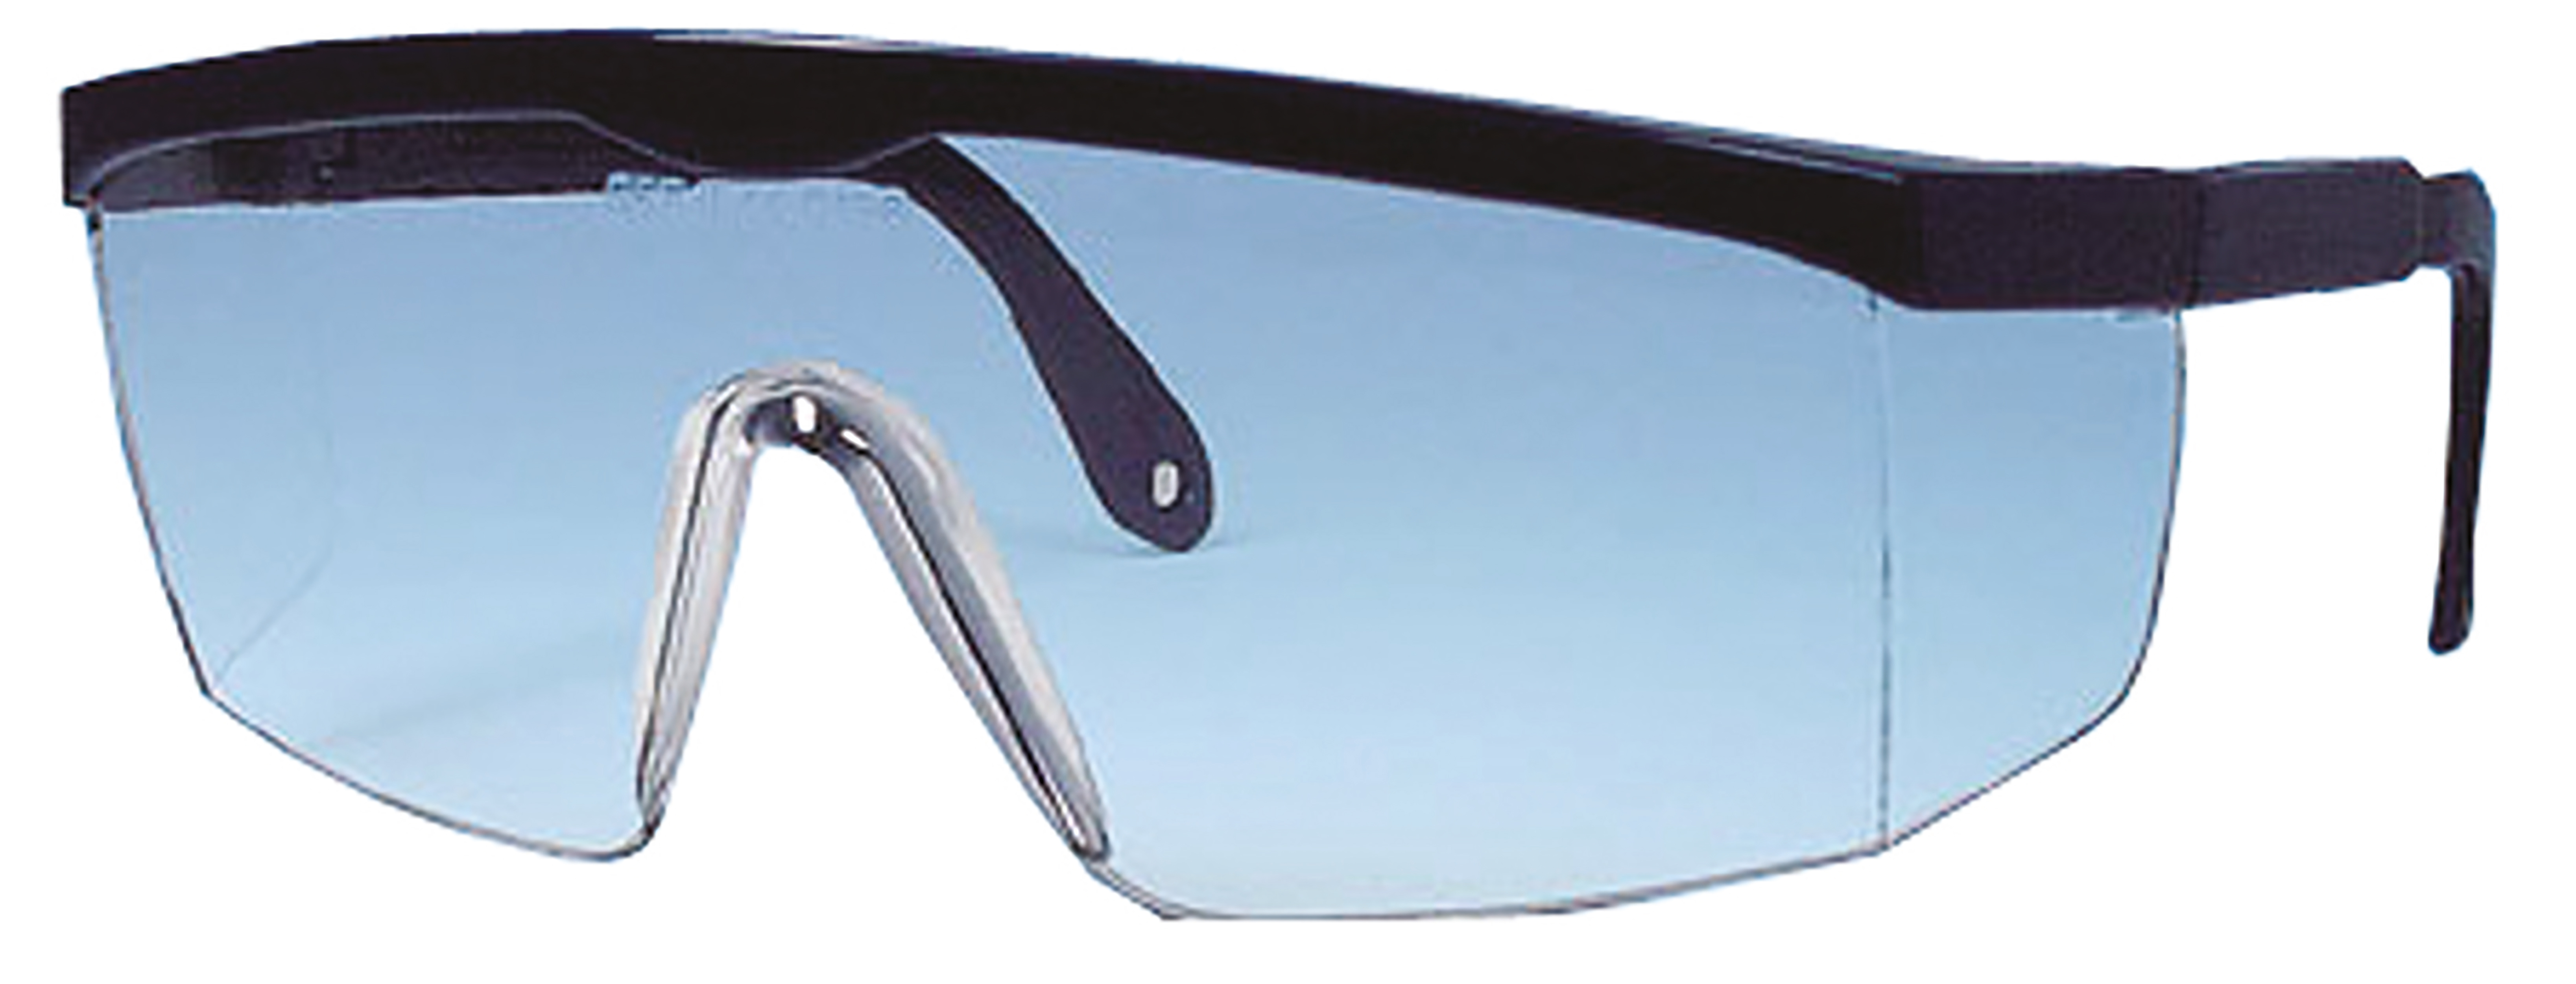 Safety glasses, panorama